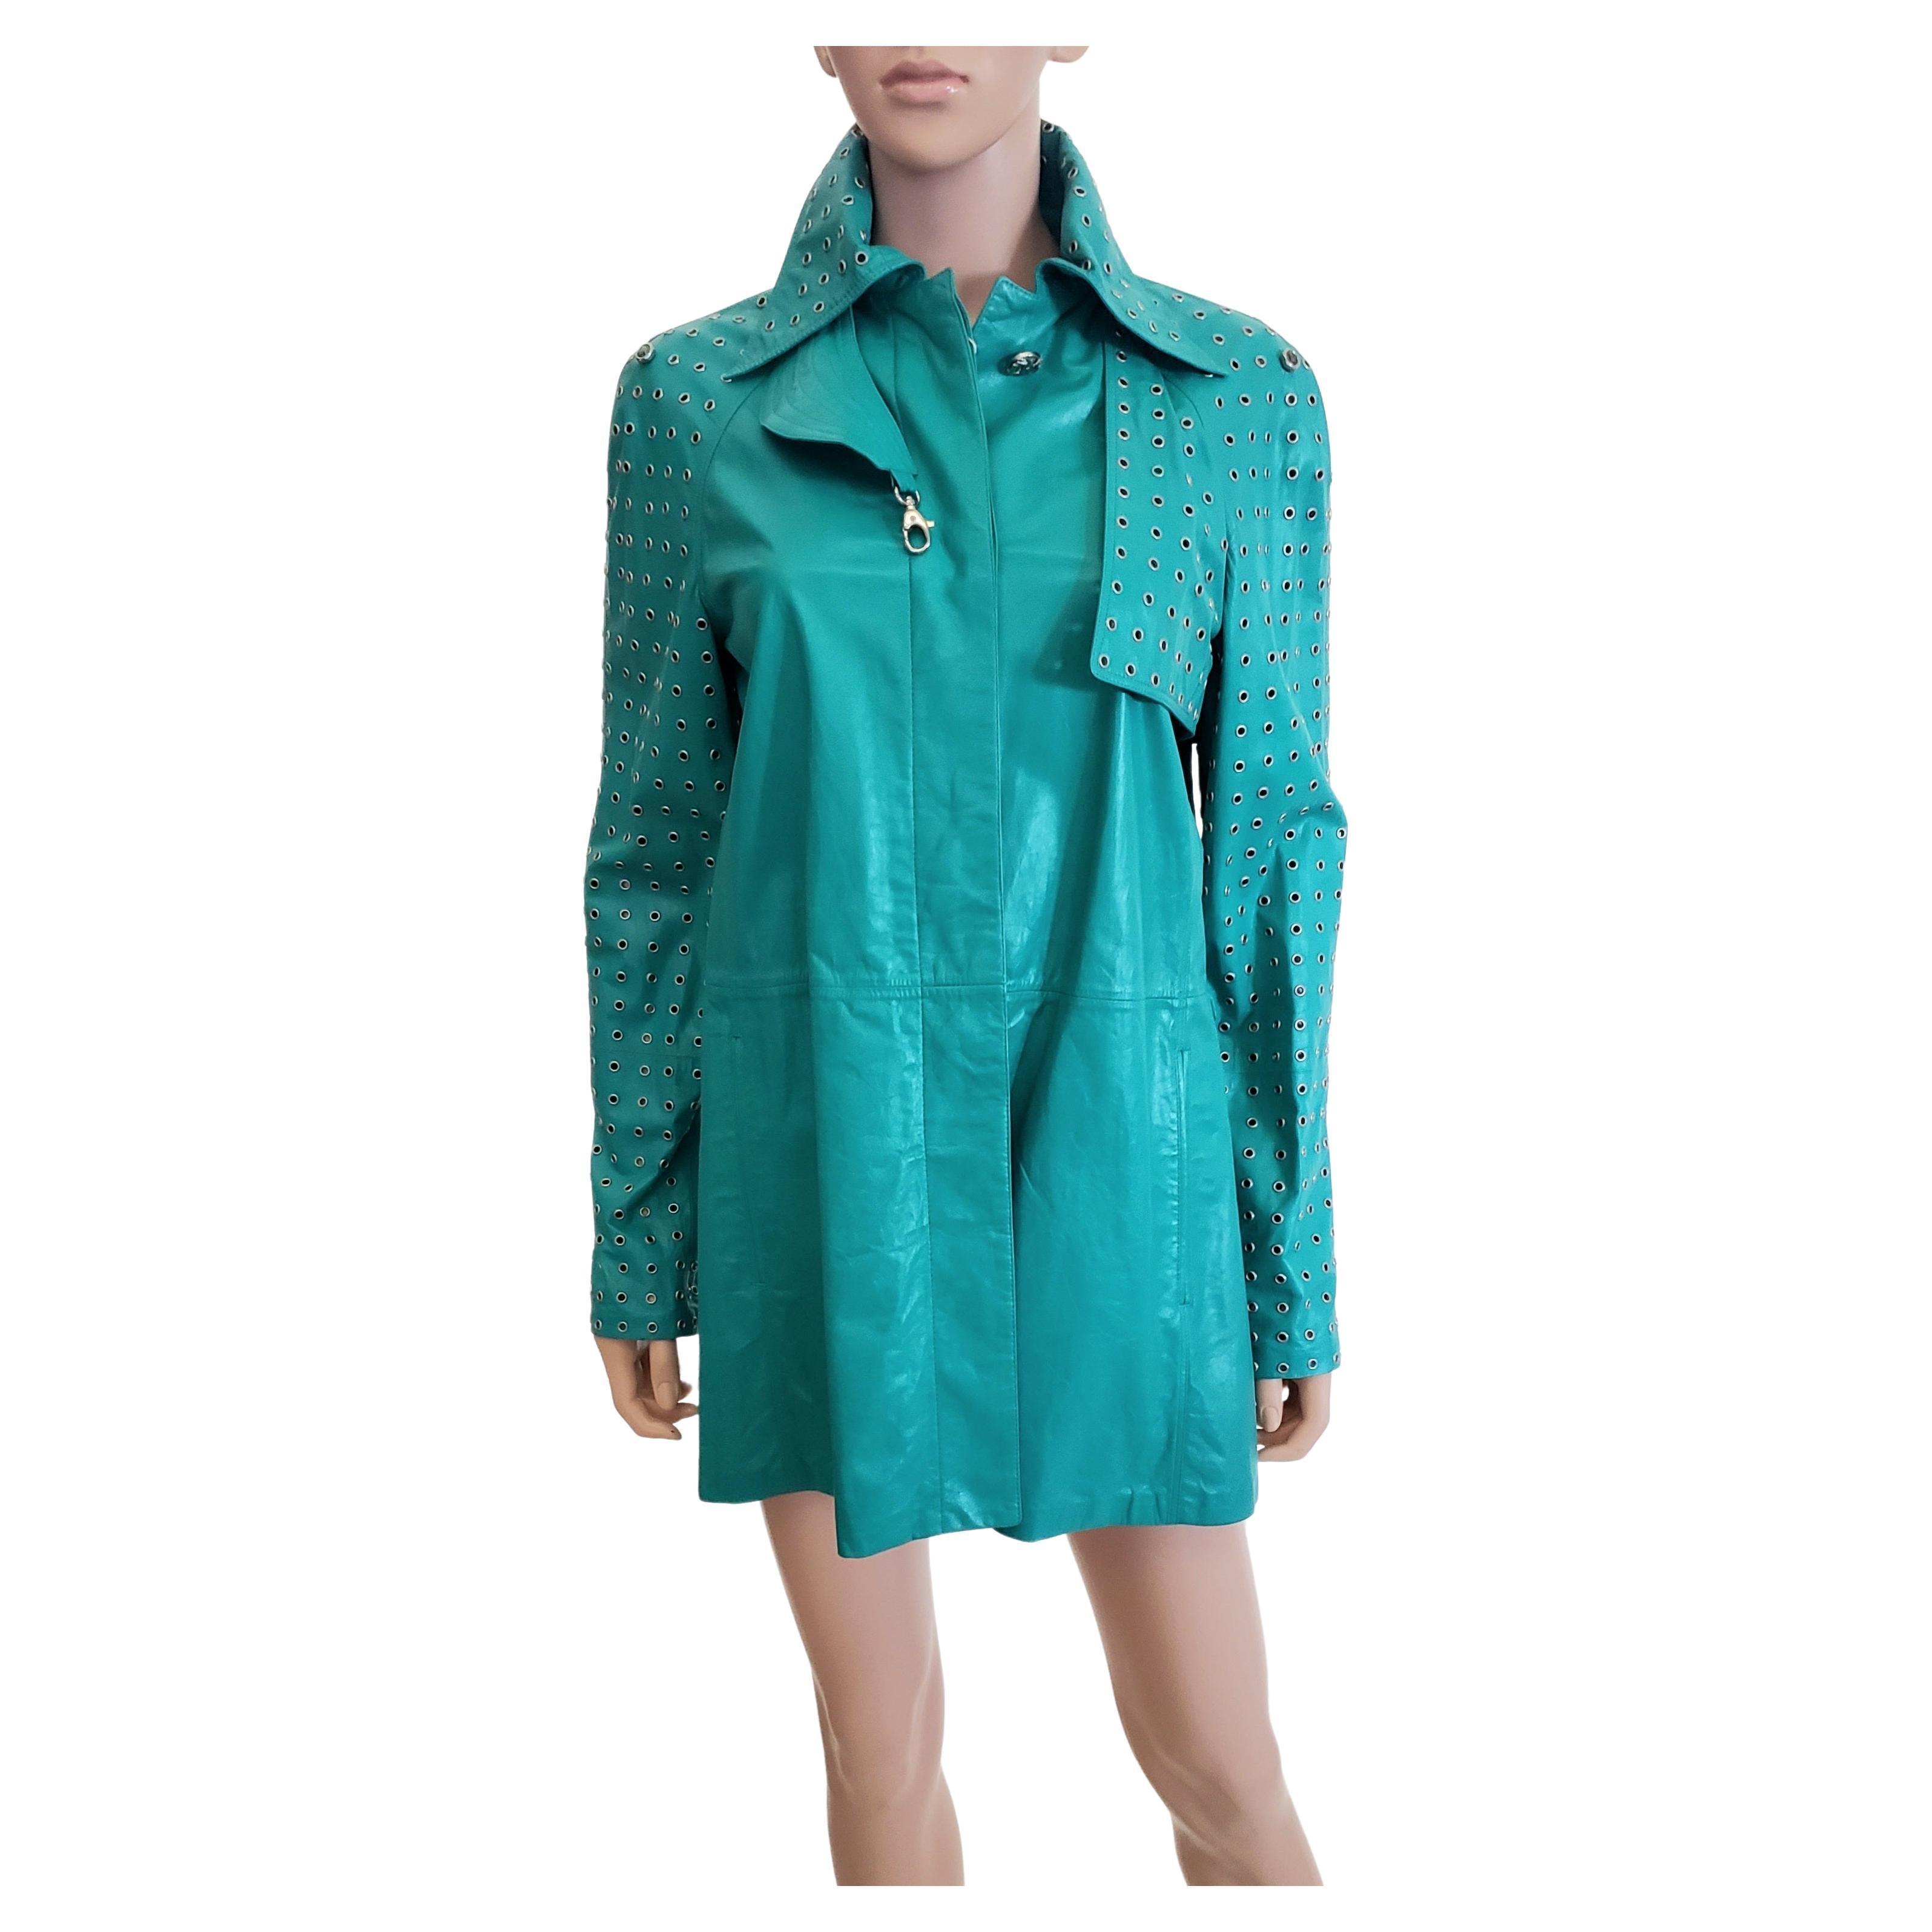 NEW GIANNI VERSACE EMERALD GREEN LEATHER JACKET with RIVETS Sz IT 40 - US 4/6 For Sale